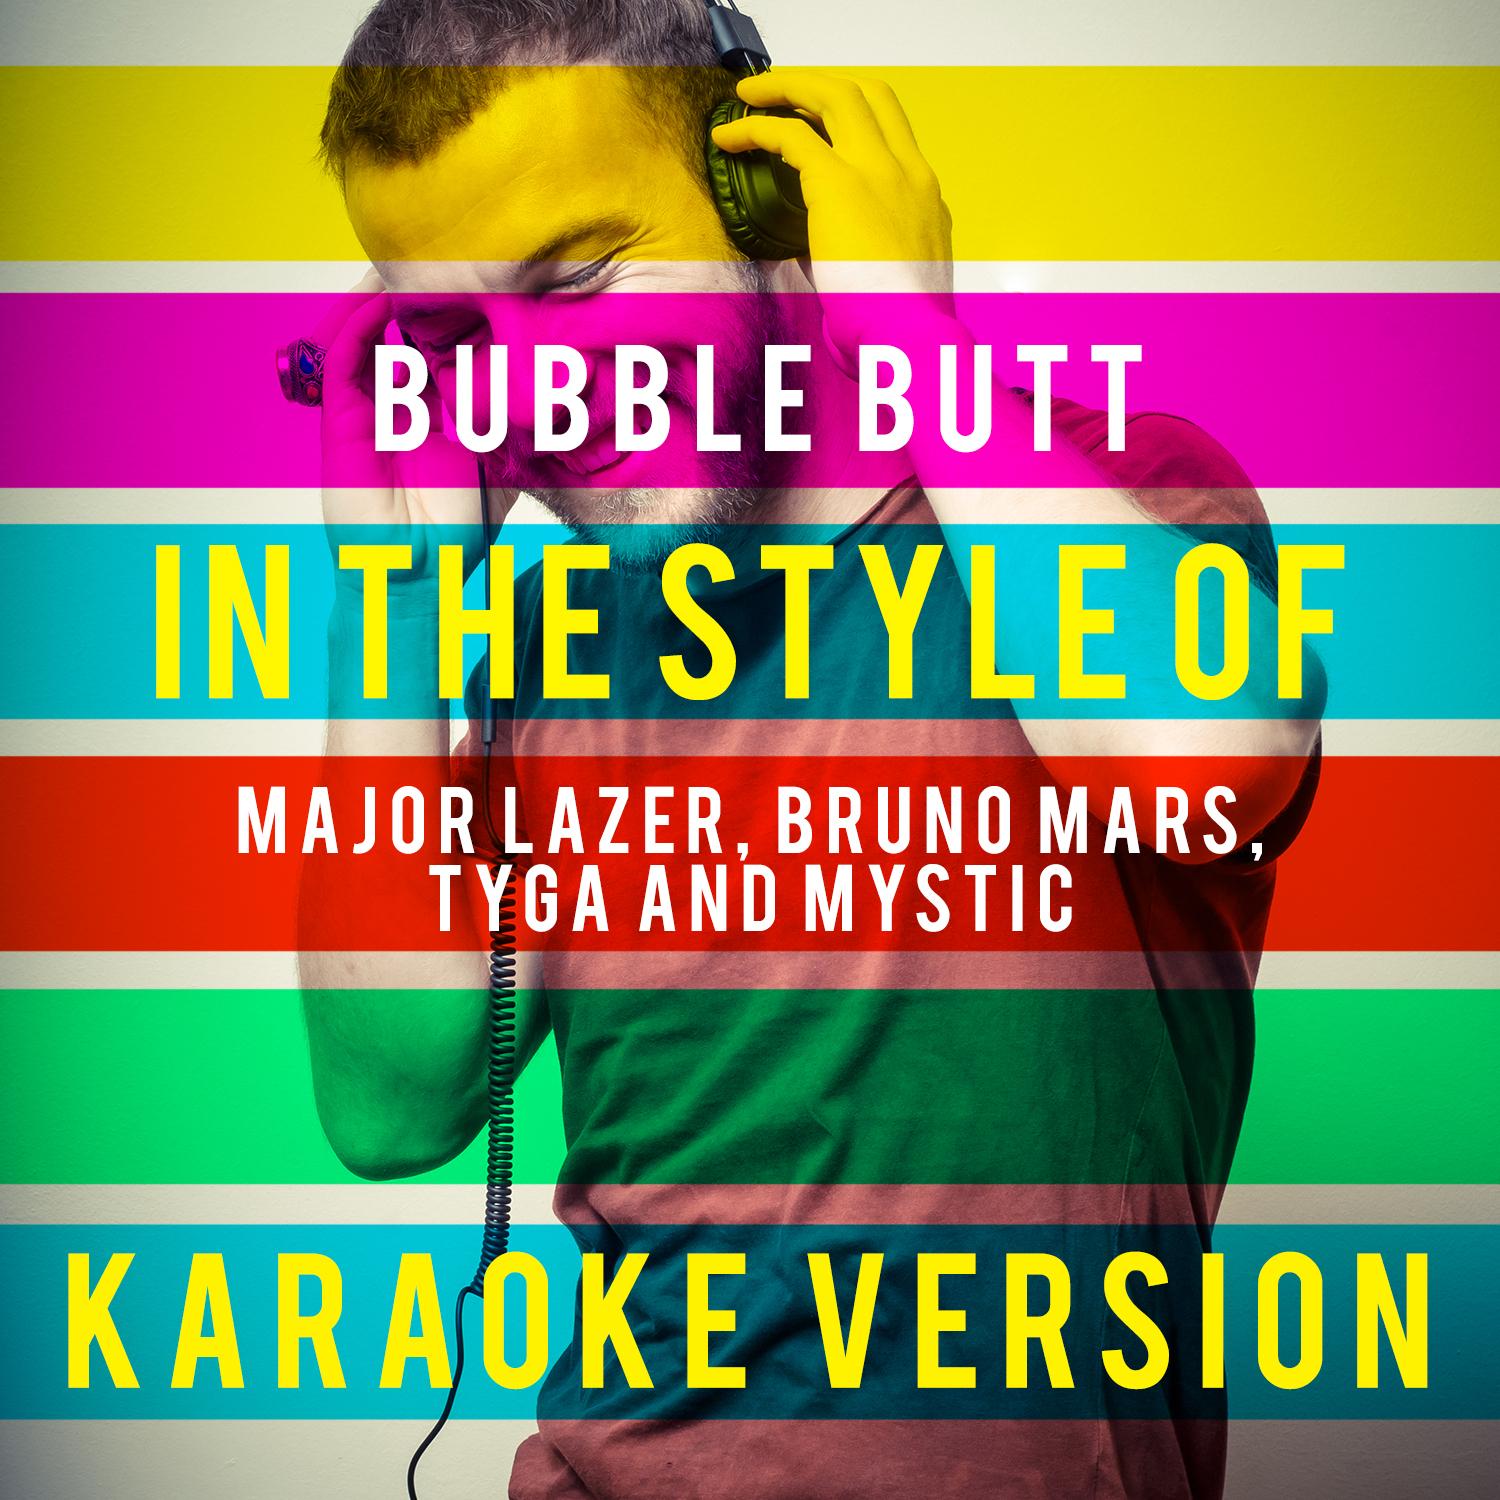 Bubble Butt (In the Style of Major Lazer, Bruno Mars, Tyga and Mystic) [Karaoke Version]